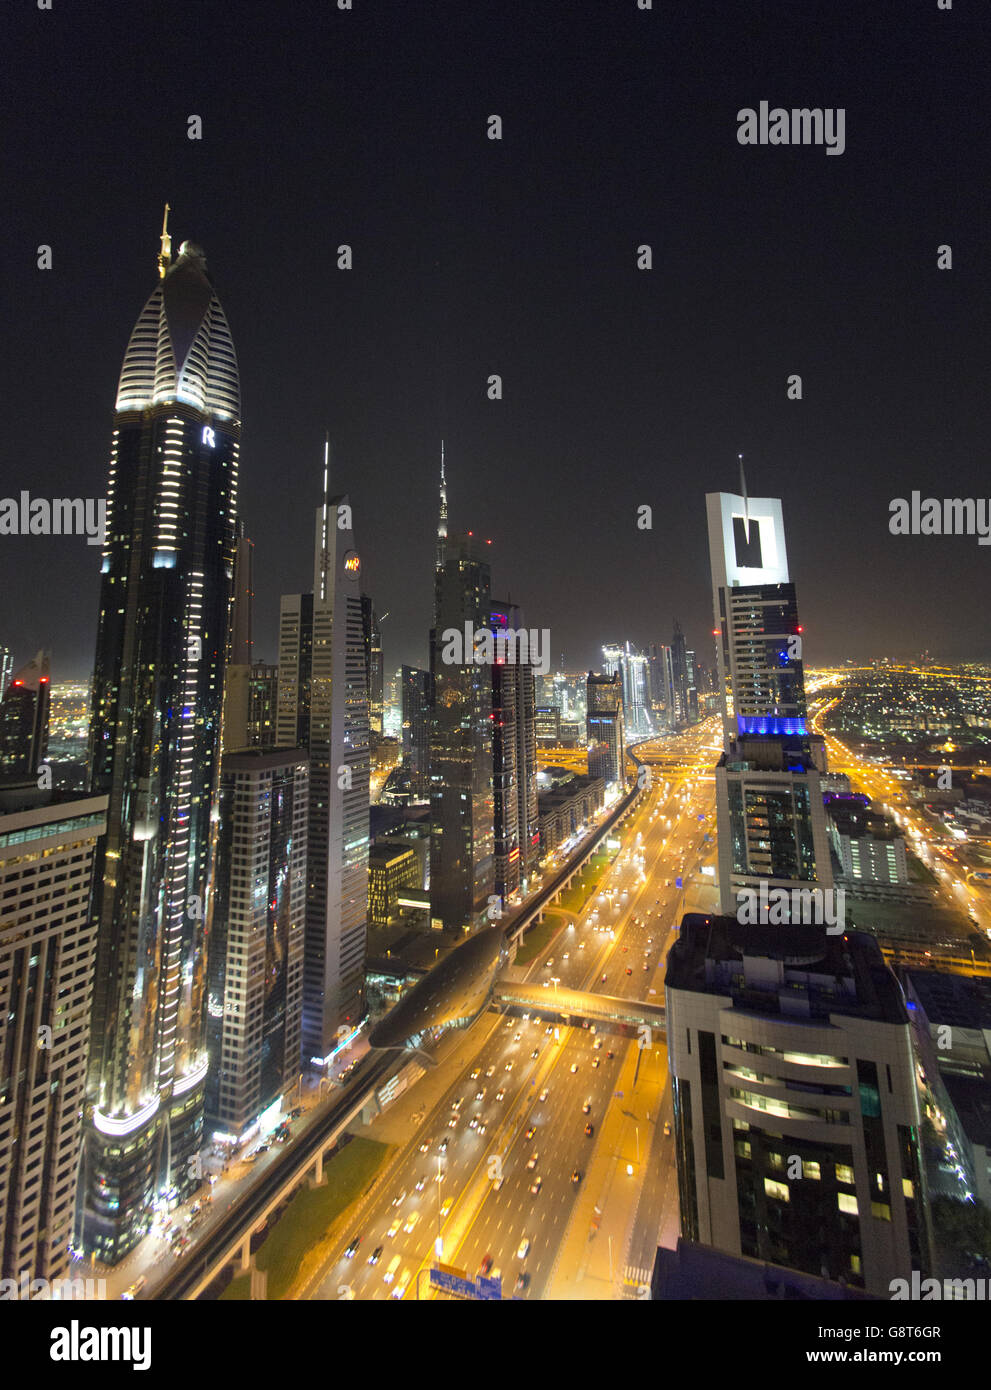 A view of the skyline at night of downtown Dubai, UAE. PRESS ASSOCIATION Photo. Picture date: Saturday March 26, 2016. Photo credit should read: Yui Mok/PA Wire Stock Photo